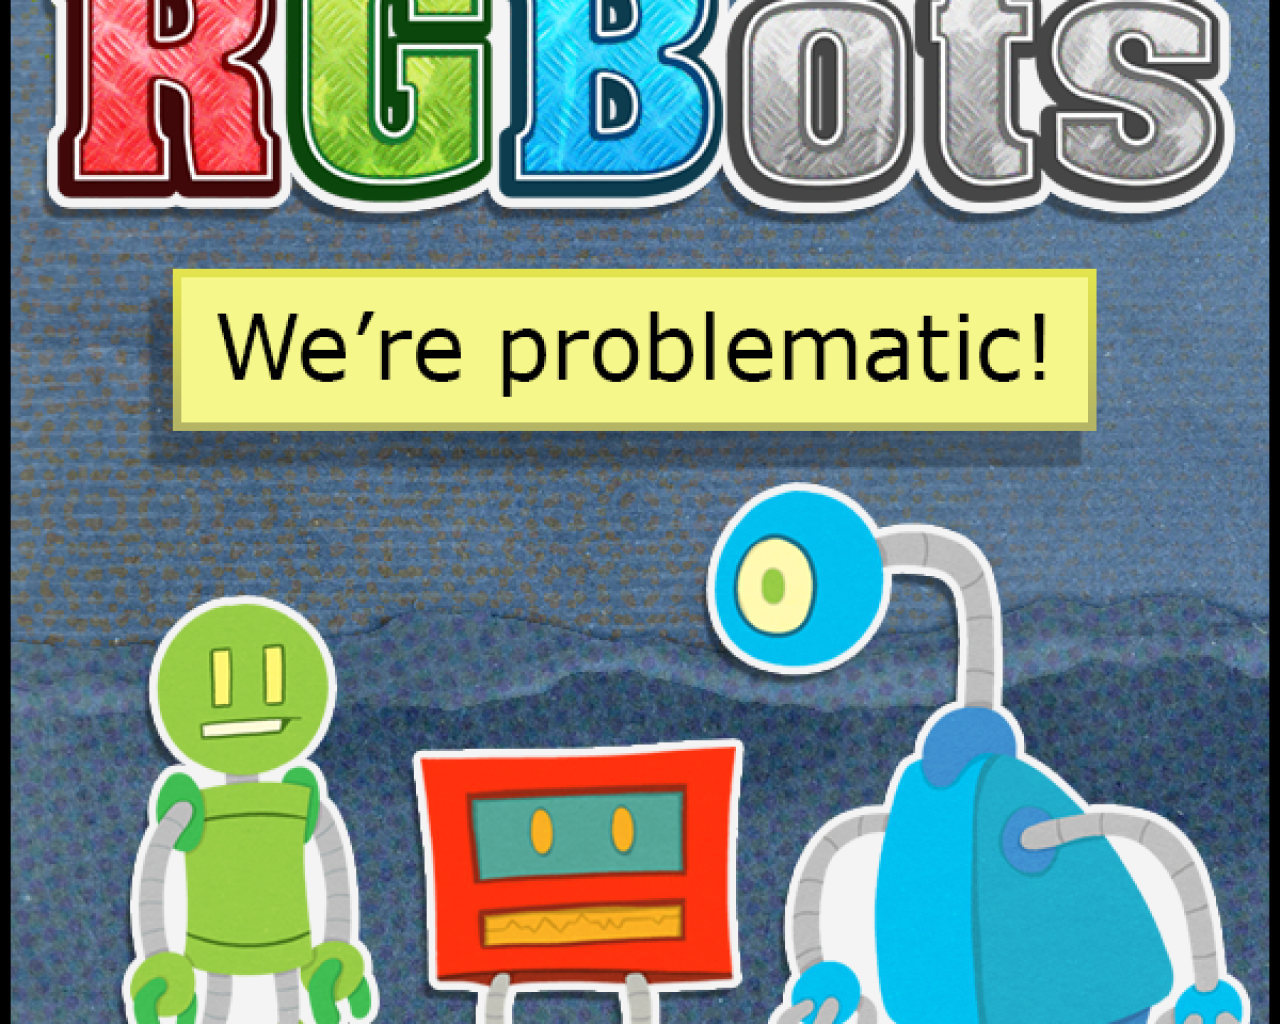 Poster Image for RGBots